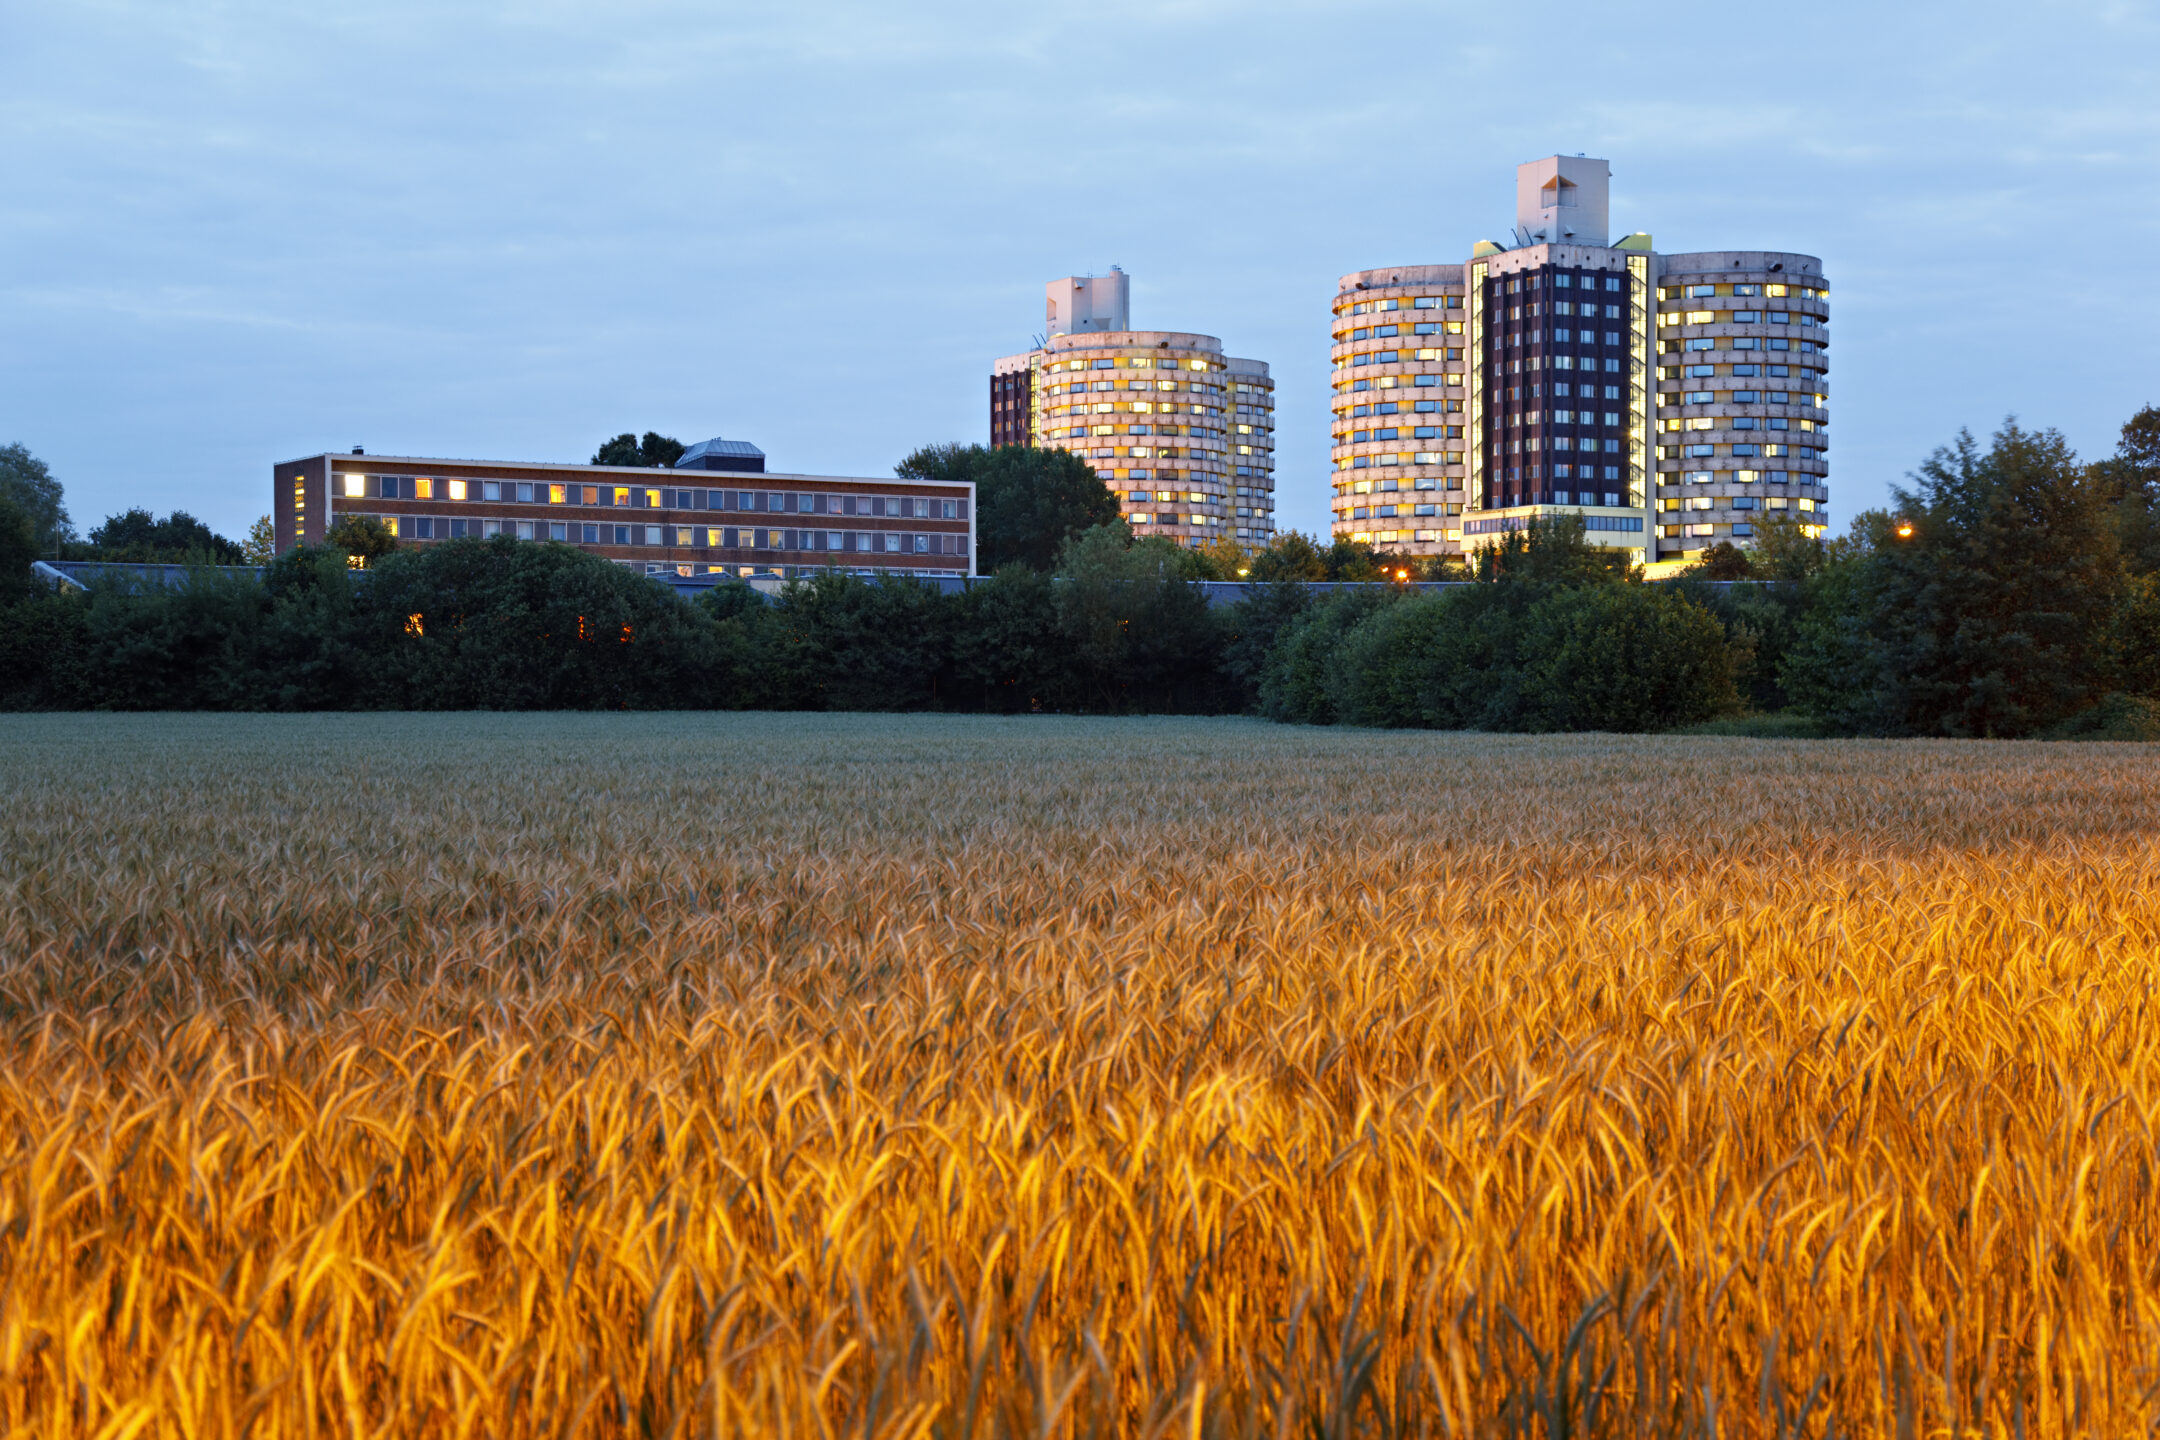 A 70s style hospital complex at dusk, an illuminated wheat field as foreground.